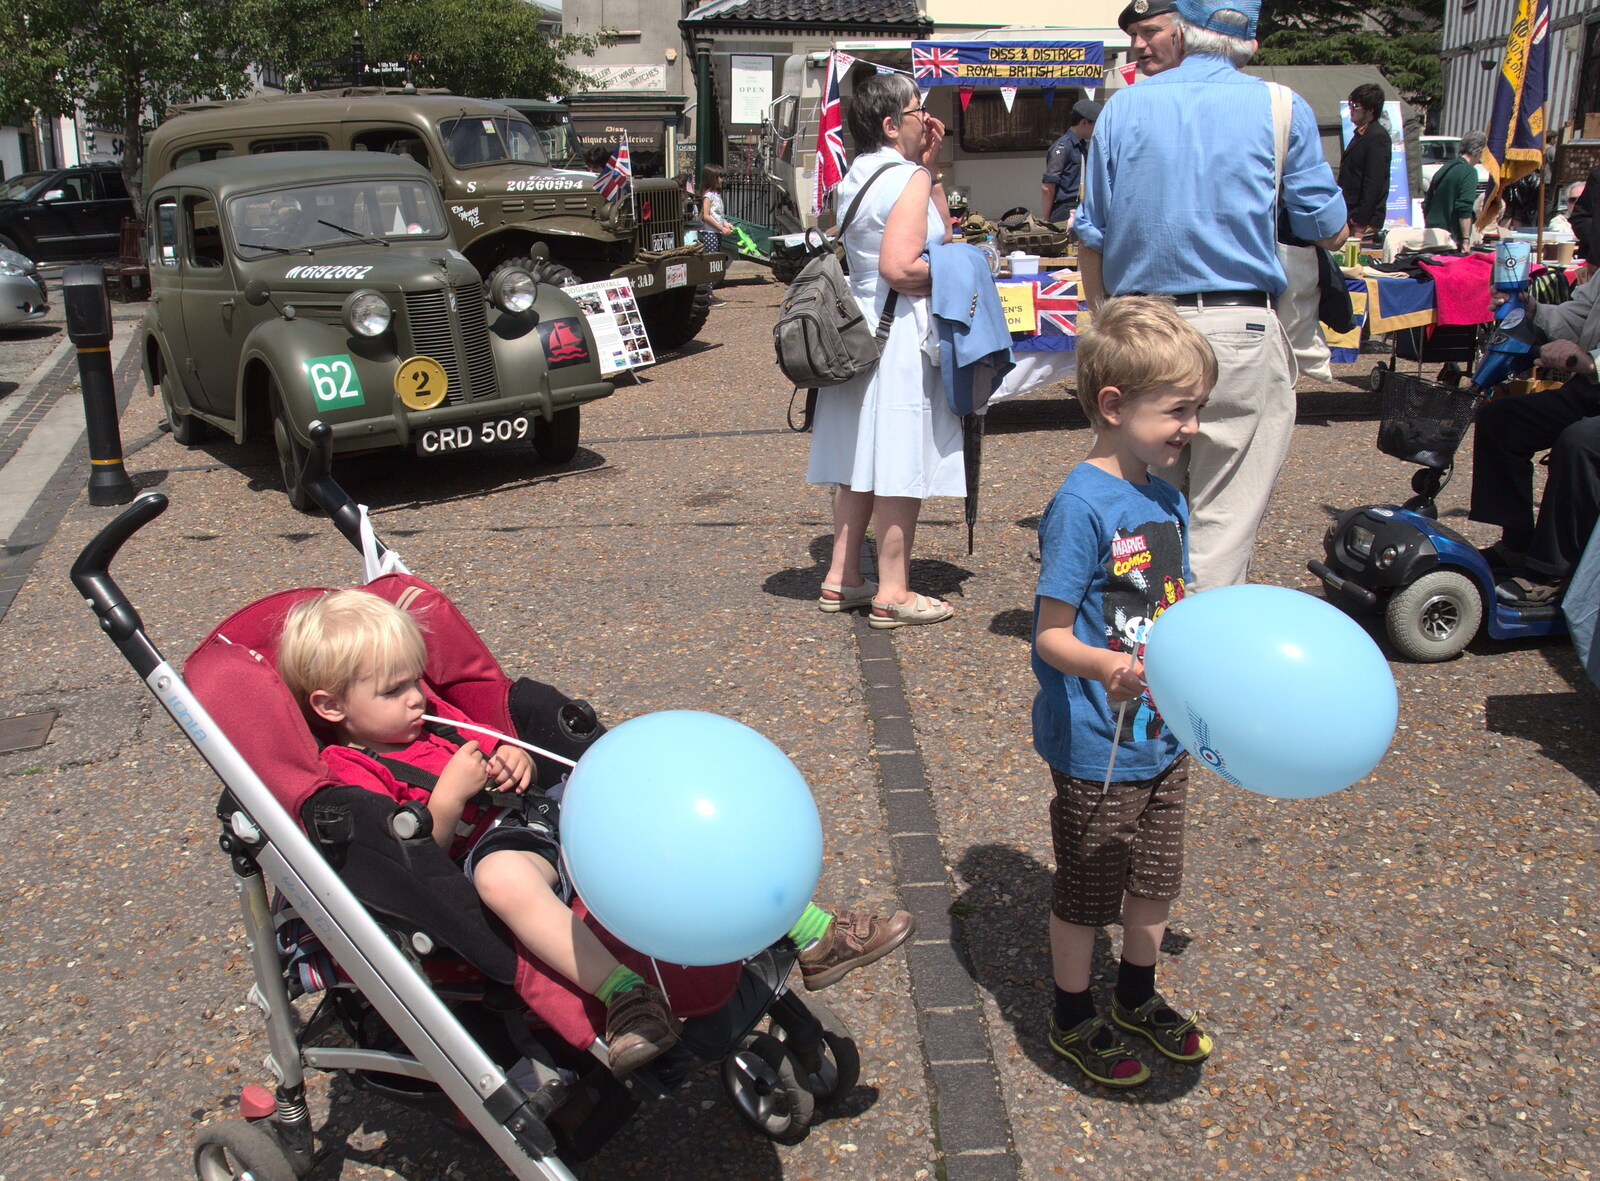 The boys have both got balloons from A Busy Day and a Church Fair, Diss, Norfolk - 28th June 2014